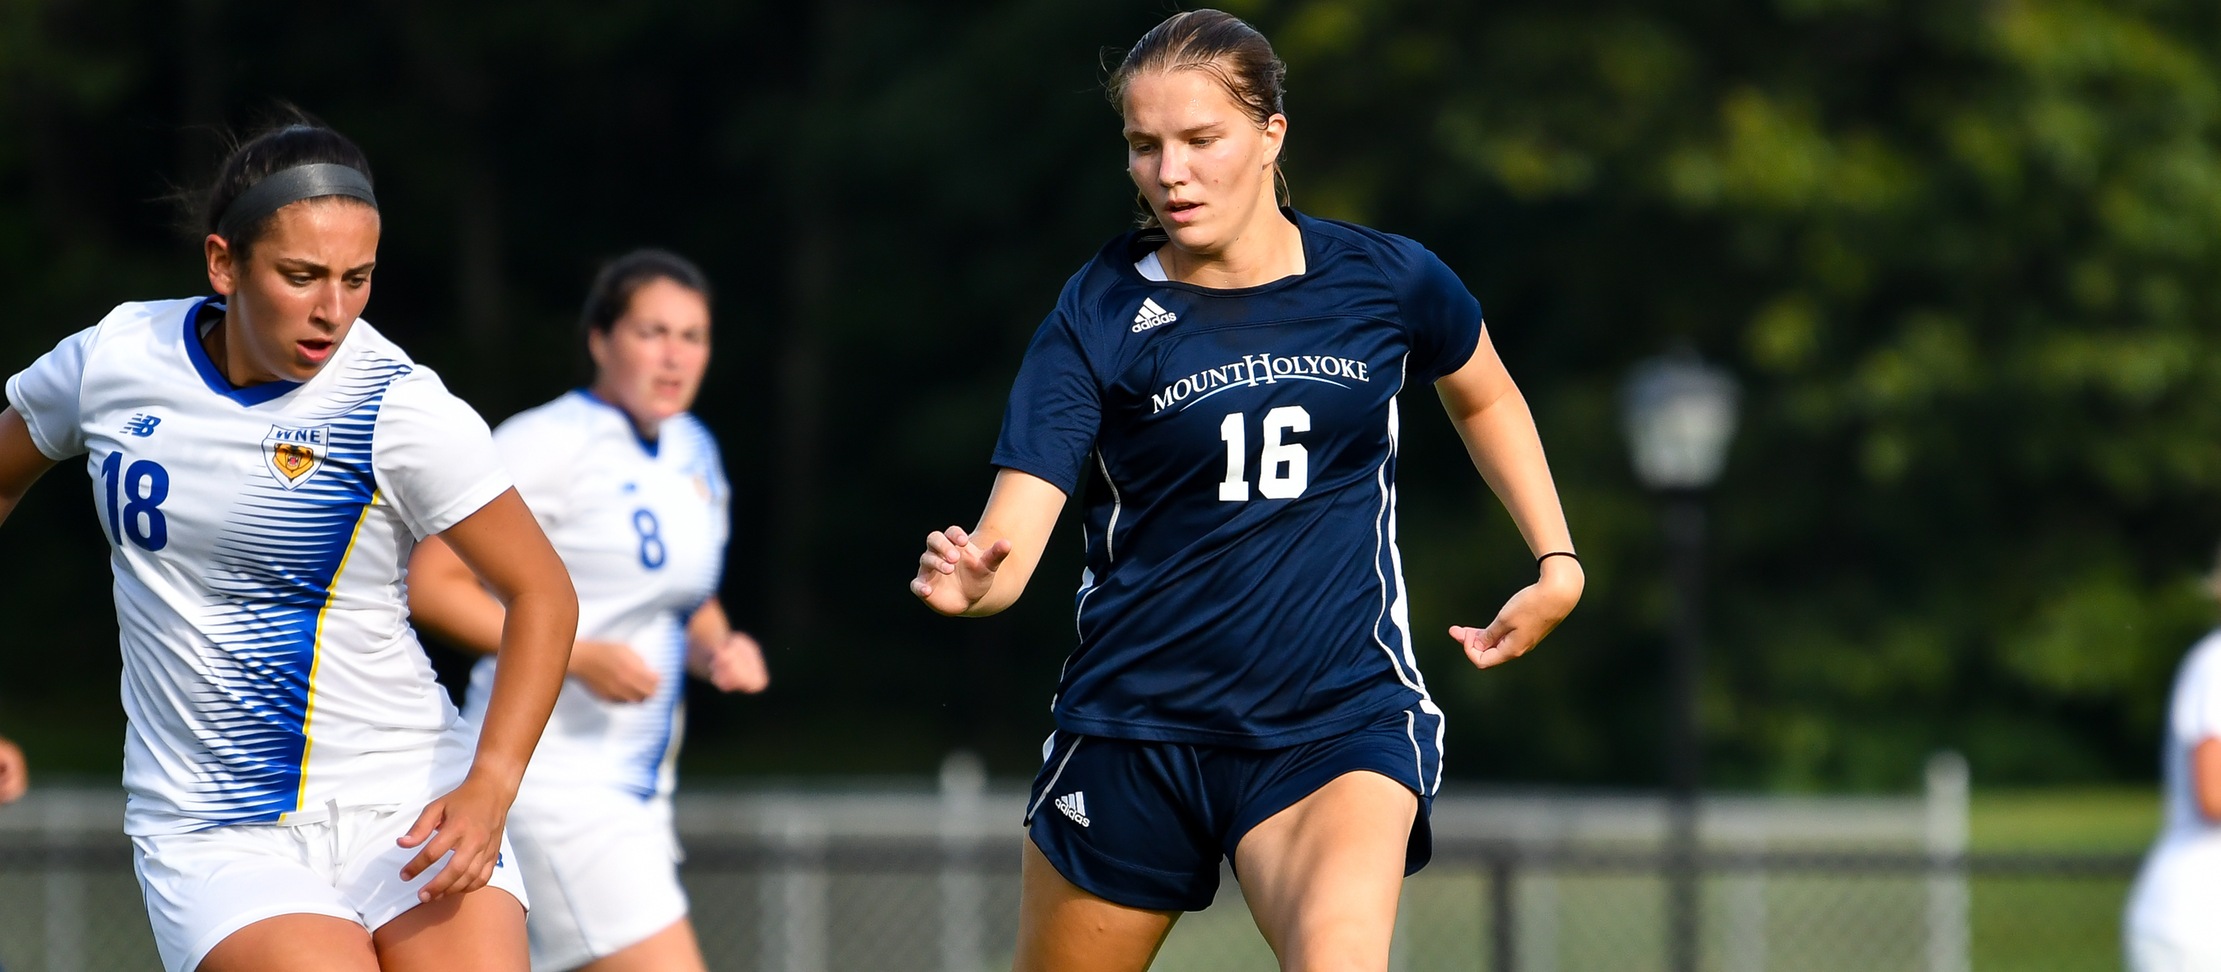 Soccer Falls to Springfield, 4-0, in NEWMAC Play